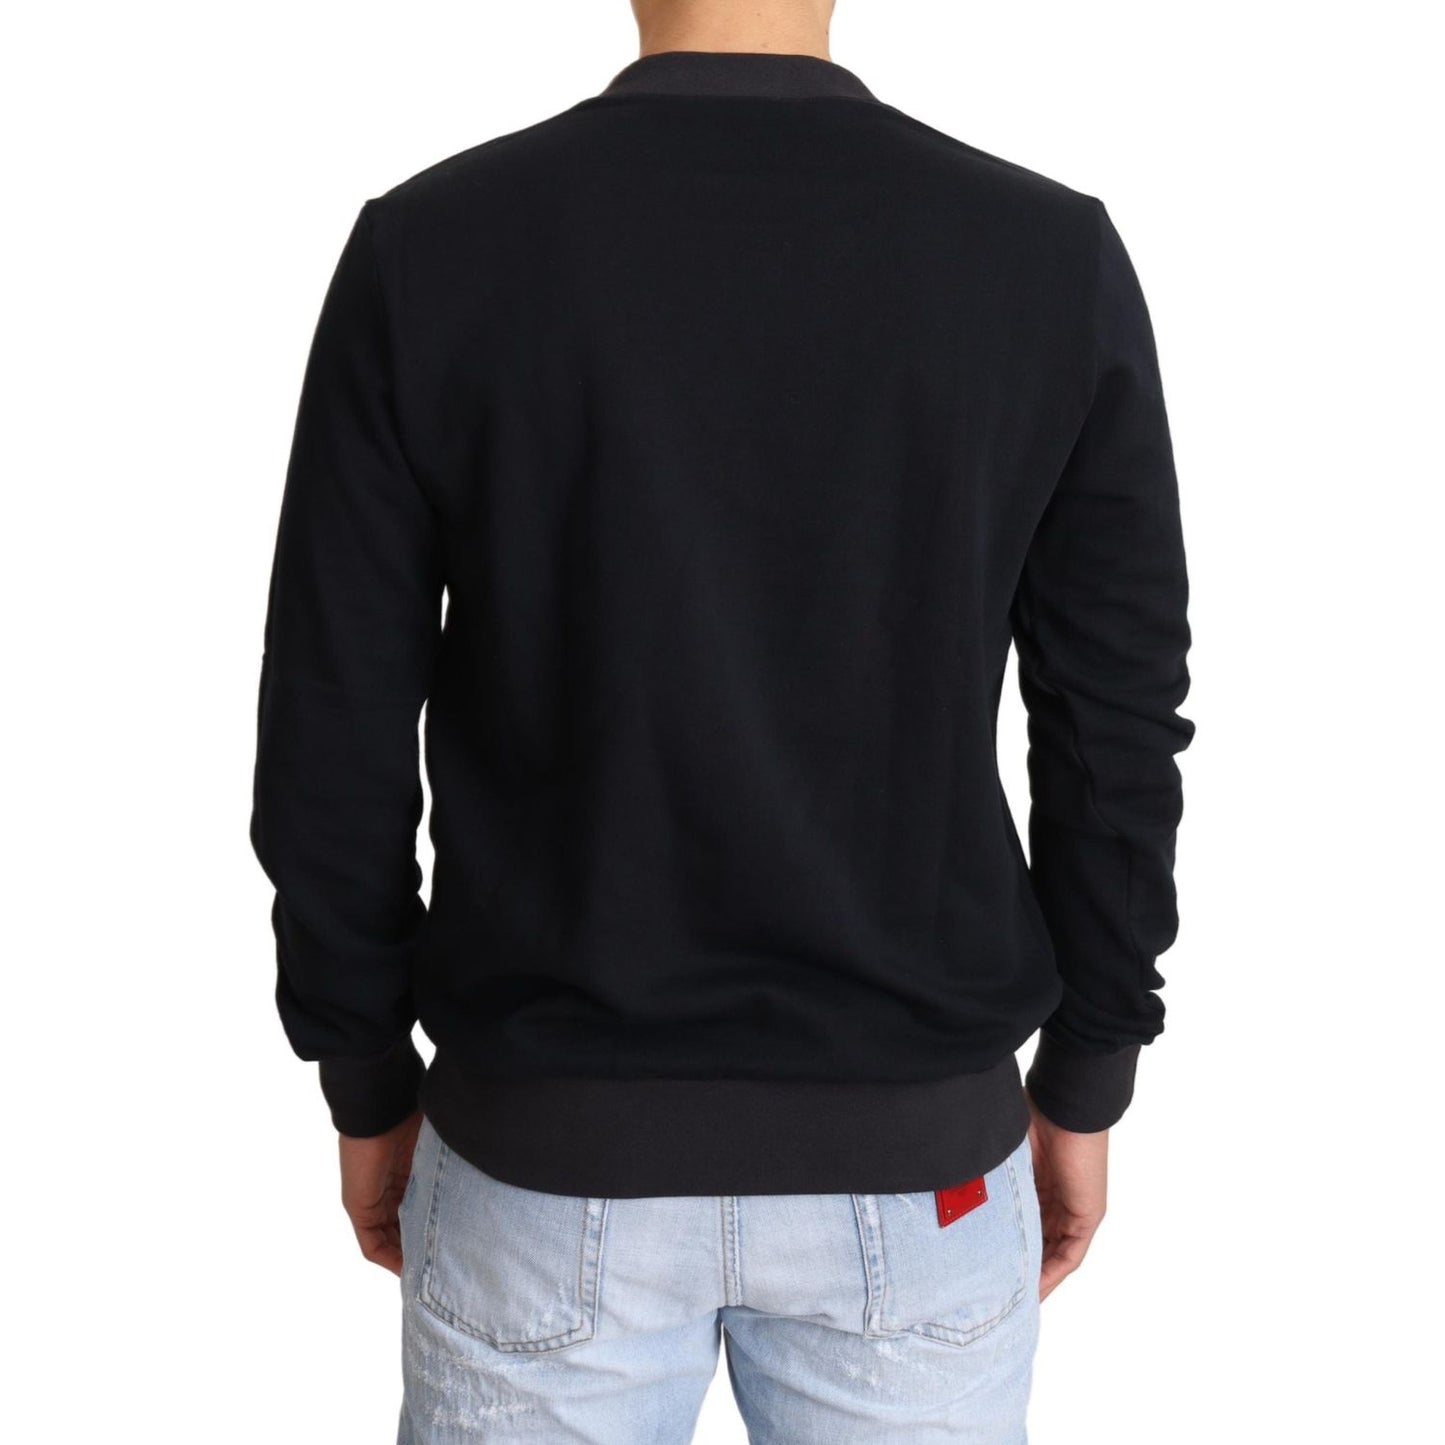 Dolce & Gabbana Blue Crown King Cotton Pullover Sweater blue-crown-king-cotton-pullover-sweater IMG_9346-scaled-108699c8-e41.jpg